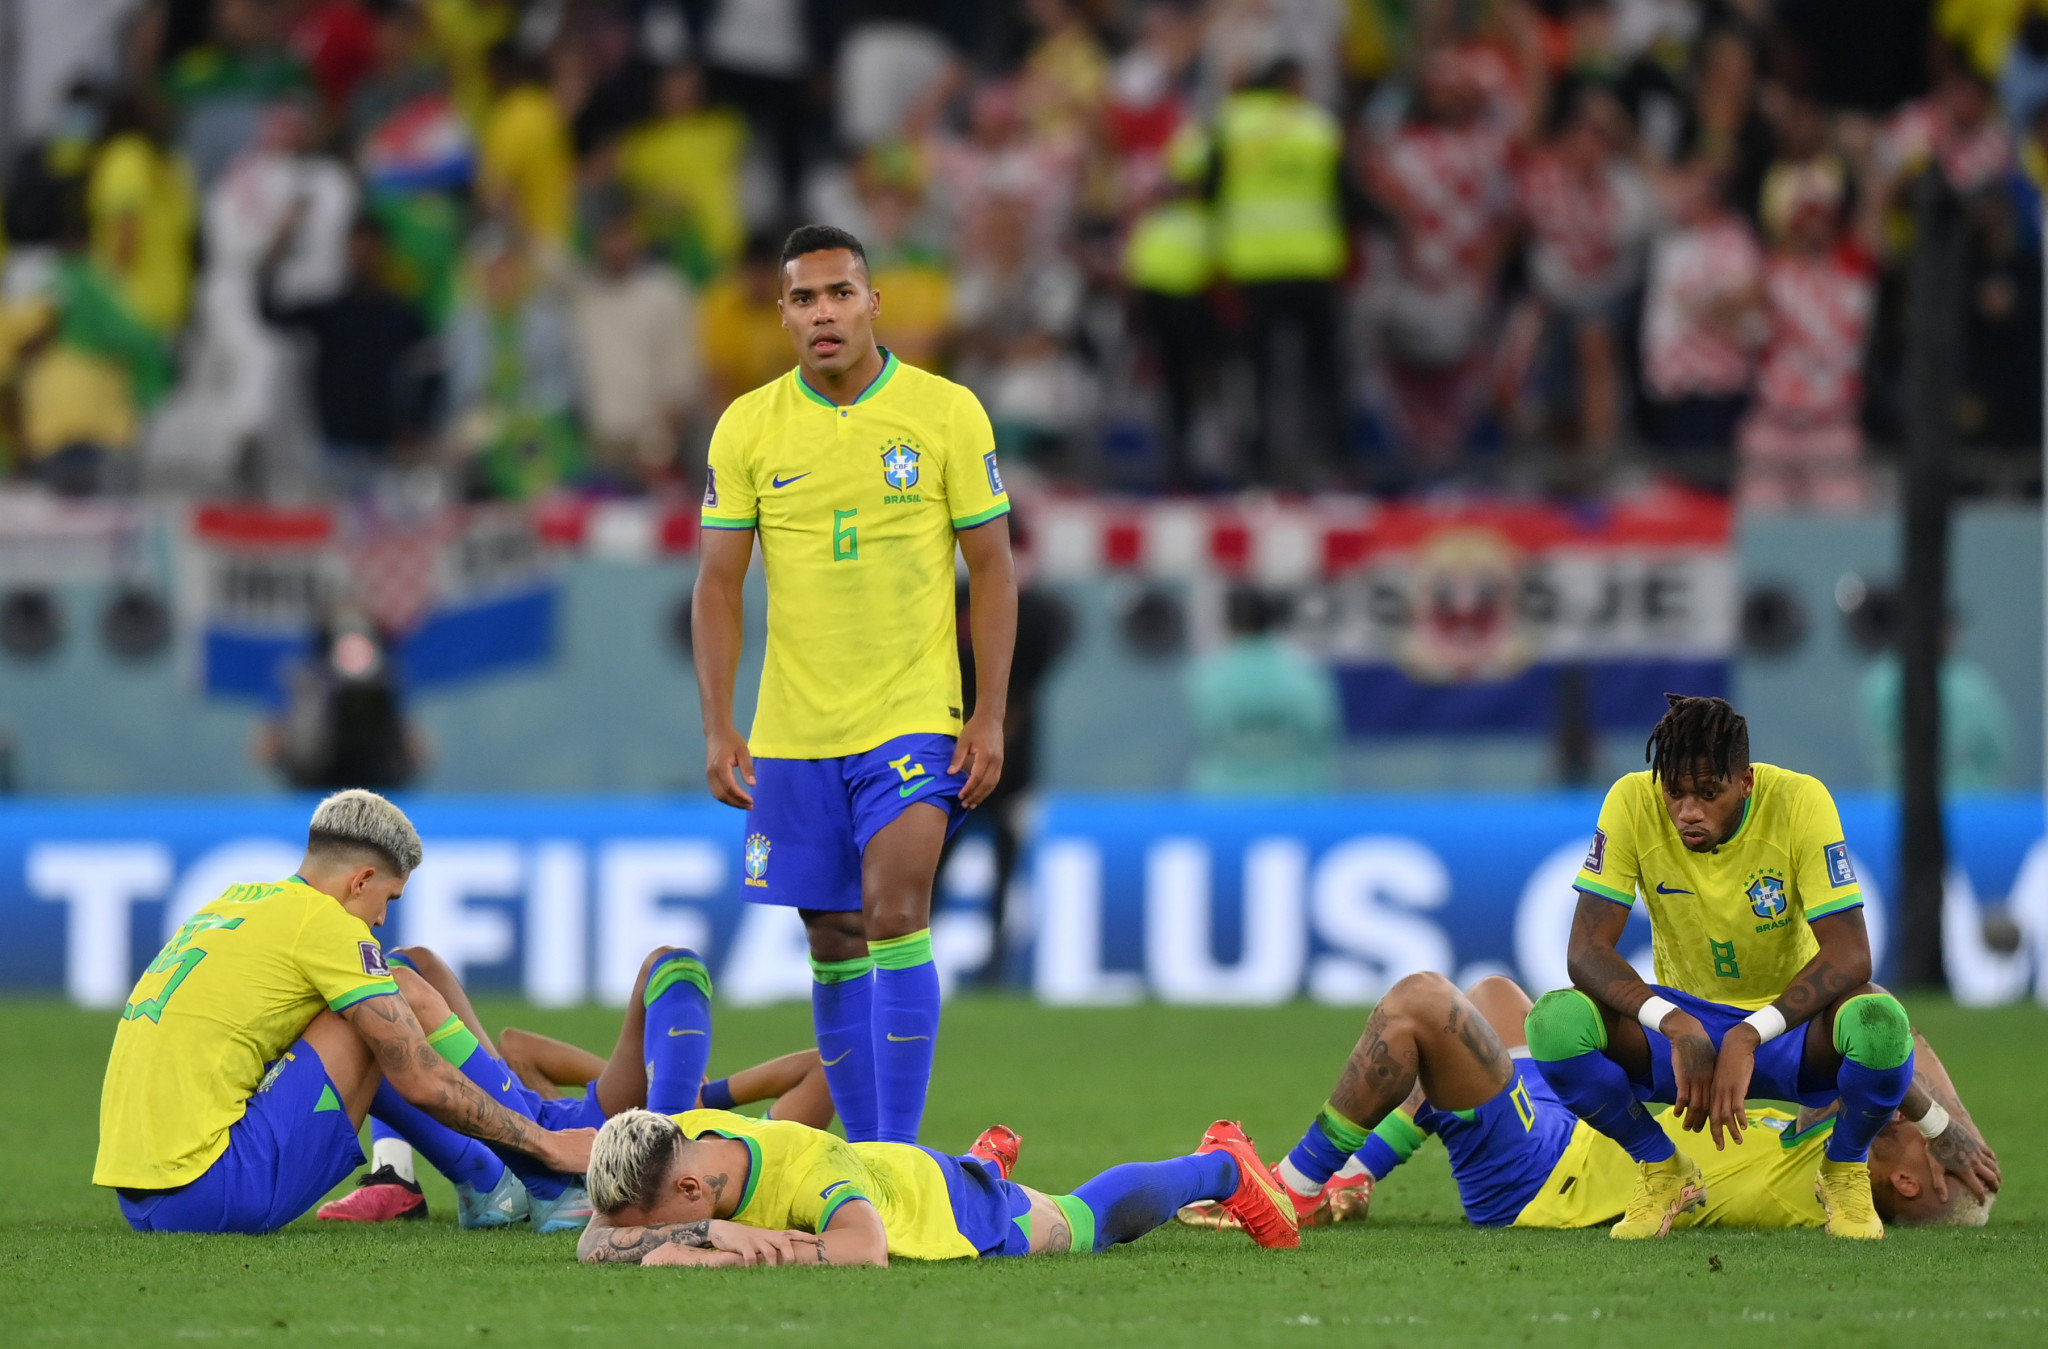 Dani Alves was part of the Brazilian team that was eliminated in the quarter-finals of the 2022 FIFA World Cup ©Getty Images